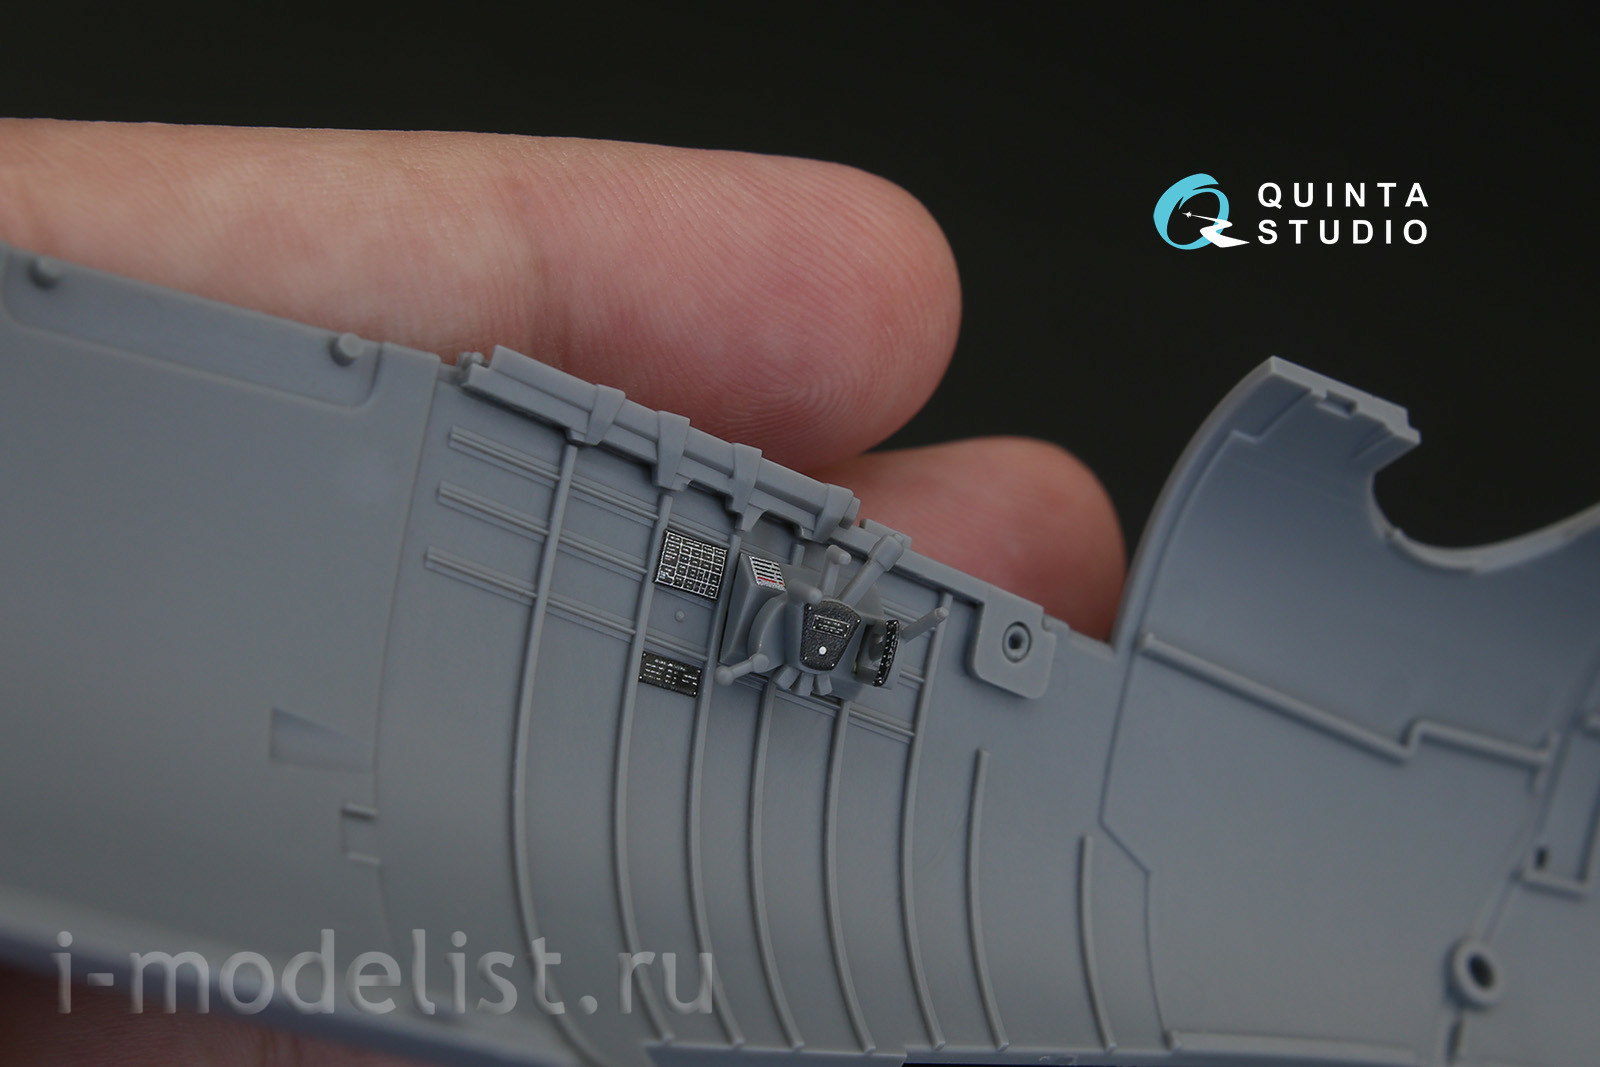 QD32015 Quinta Studio 1/32 3D Decal of the interior of the cabin F4U-1 Corsair (Bird cage) (for the Tamiya model)